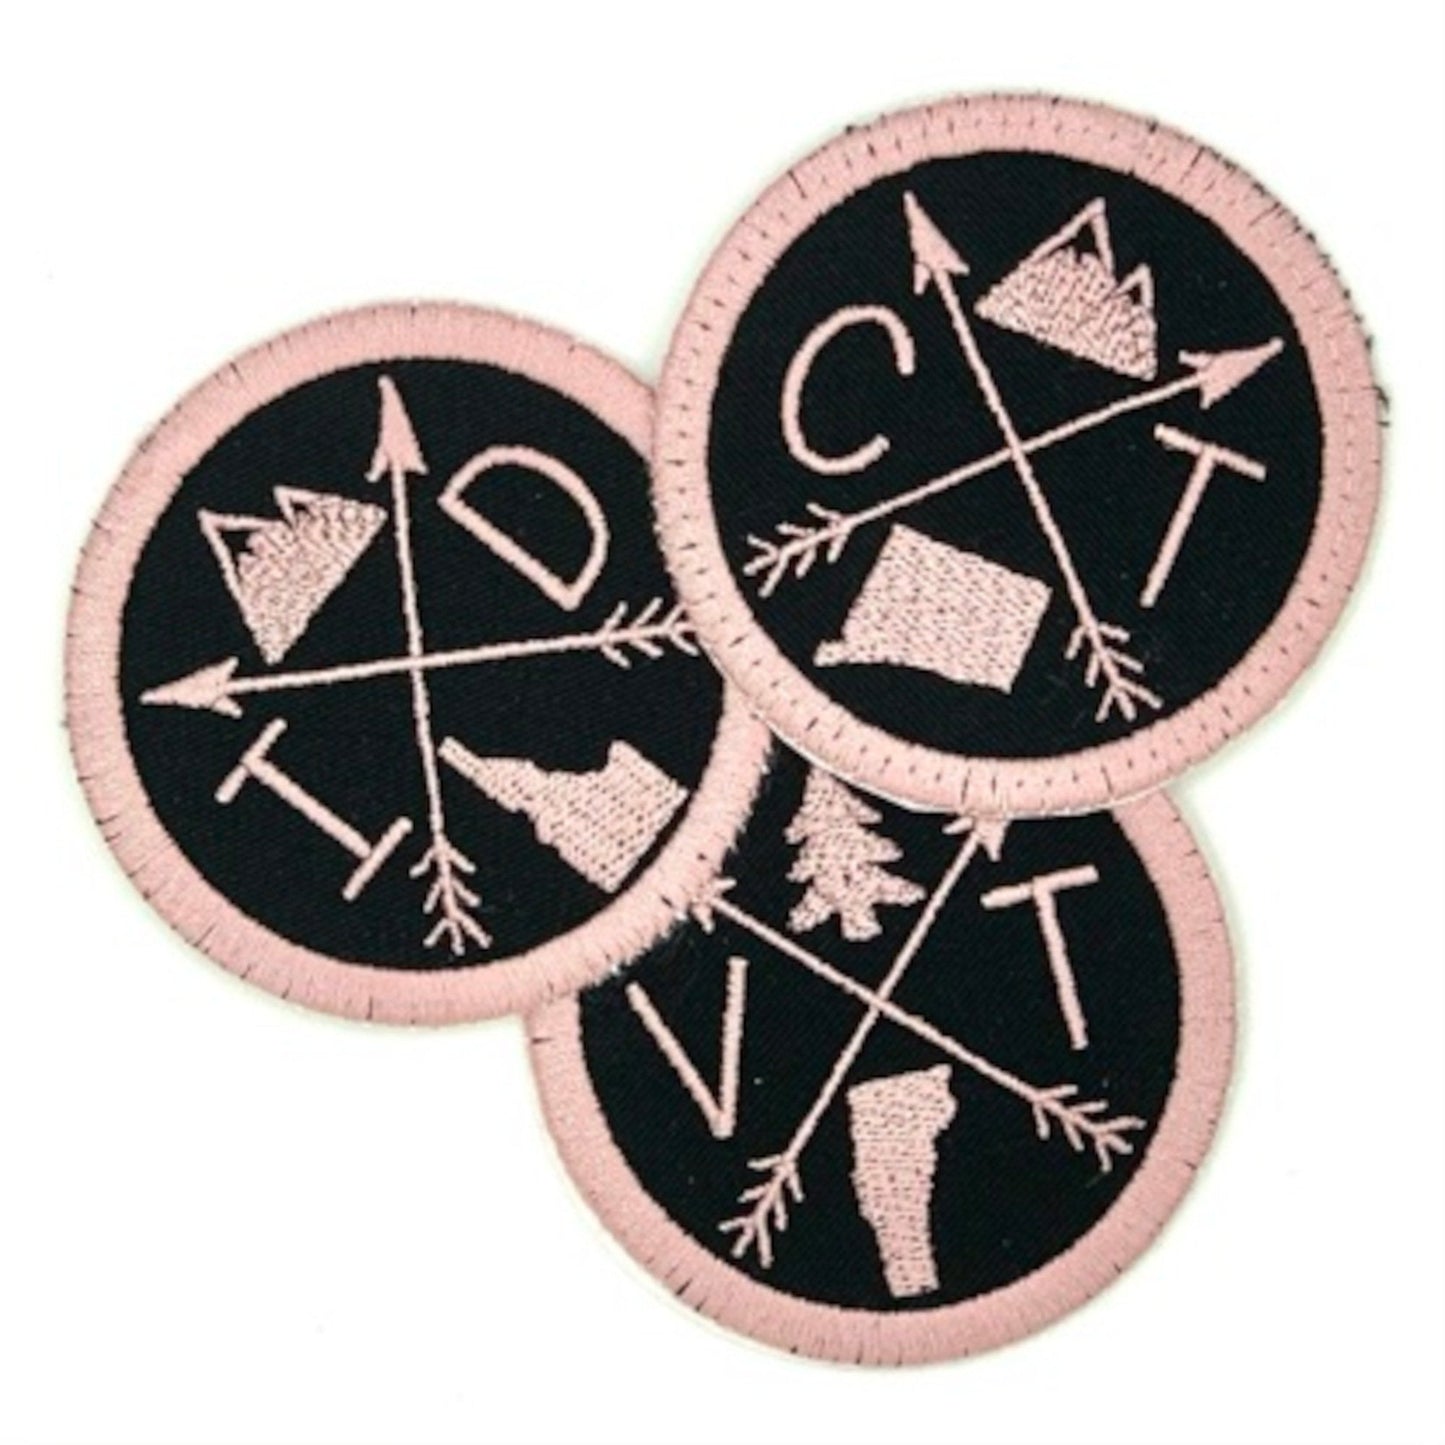 Pick Your State Iron-on Patch - rose gold on black